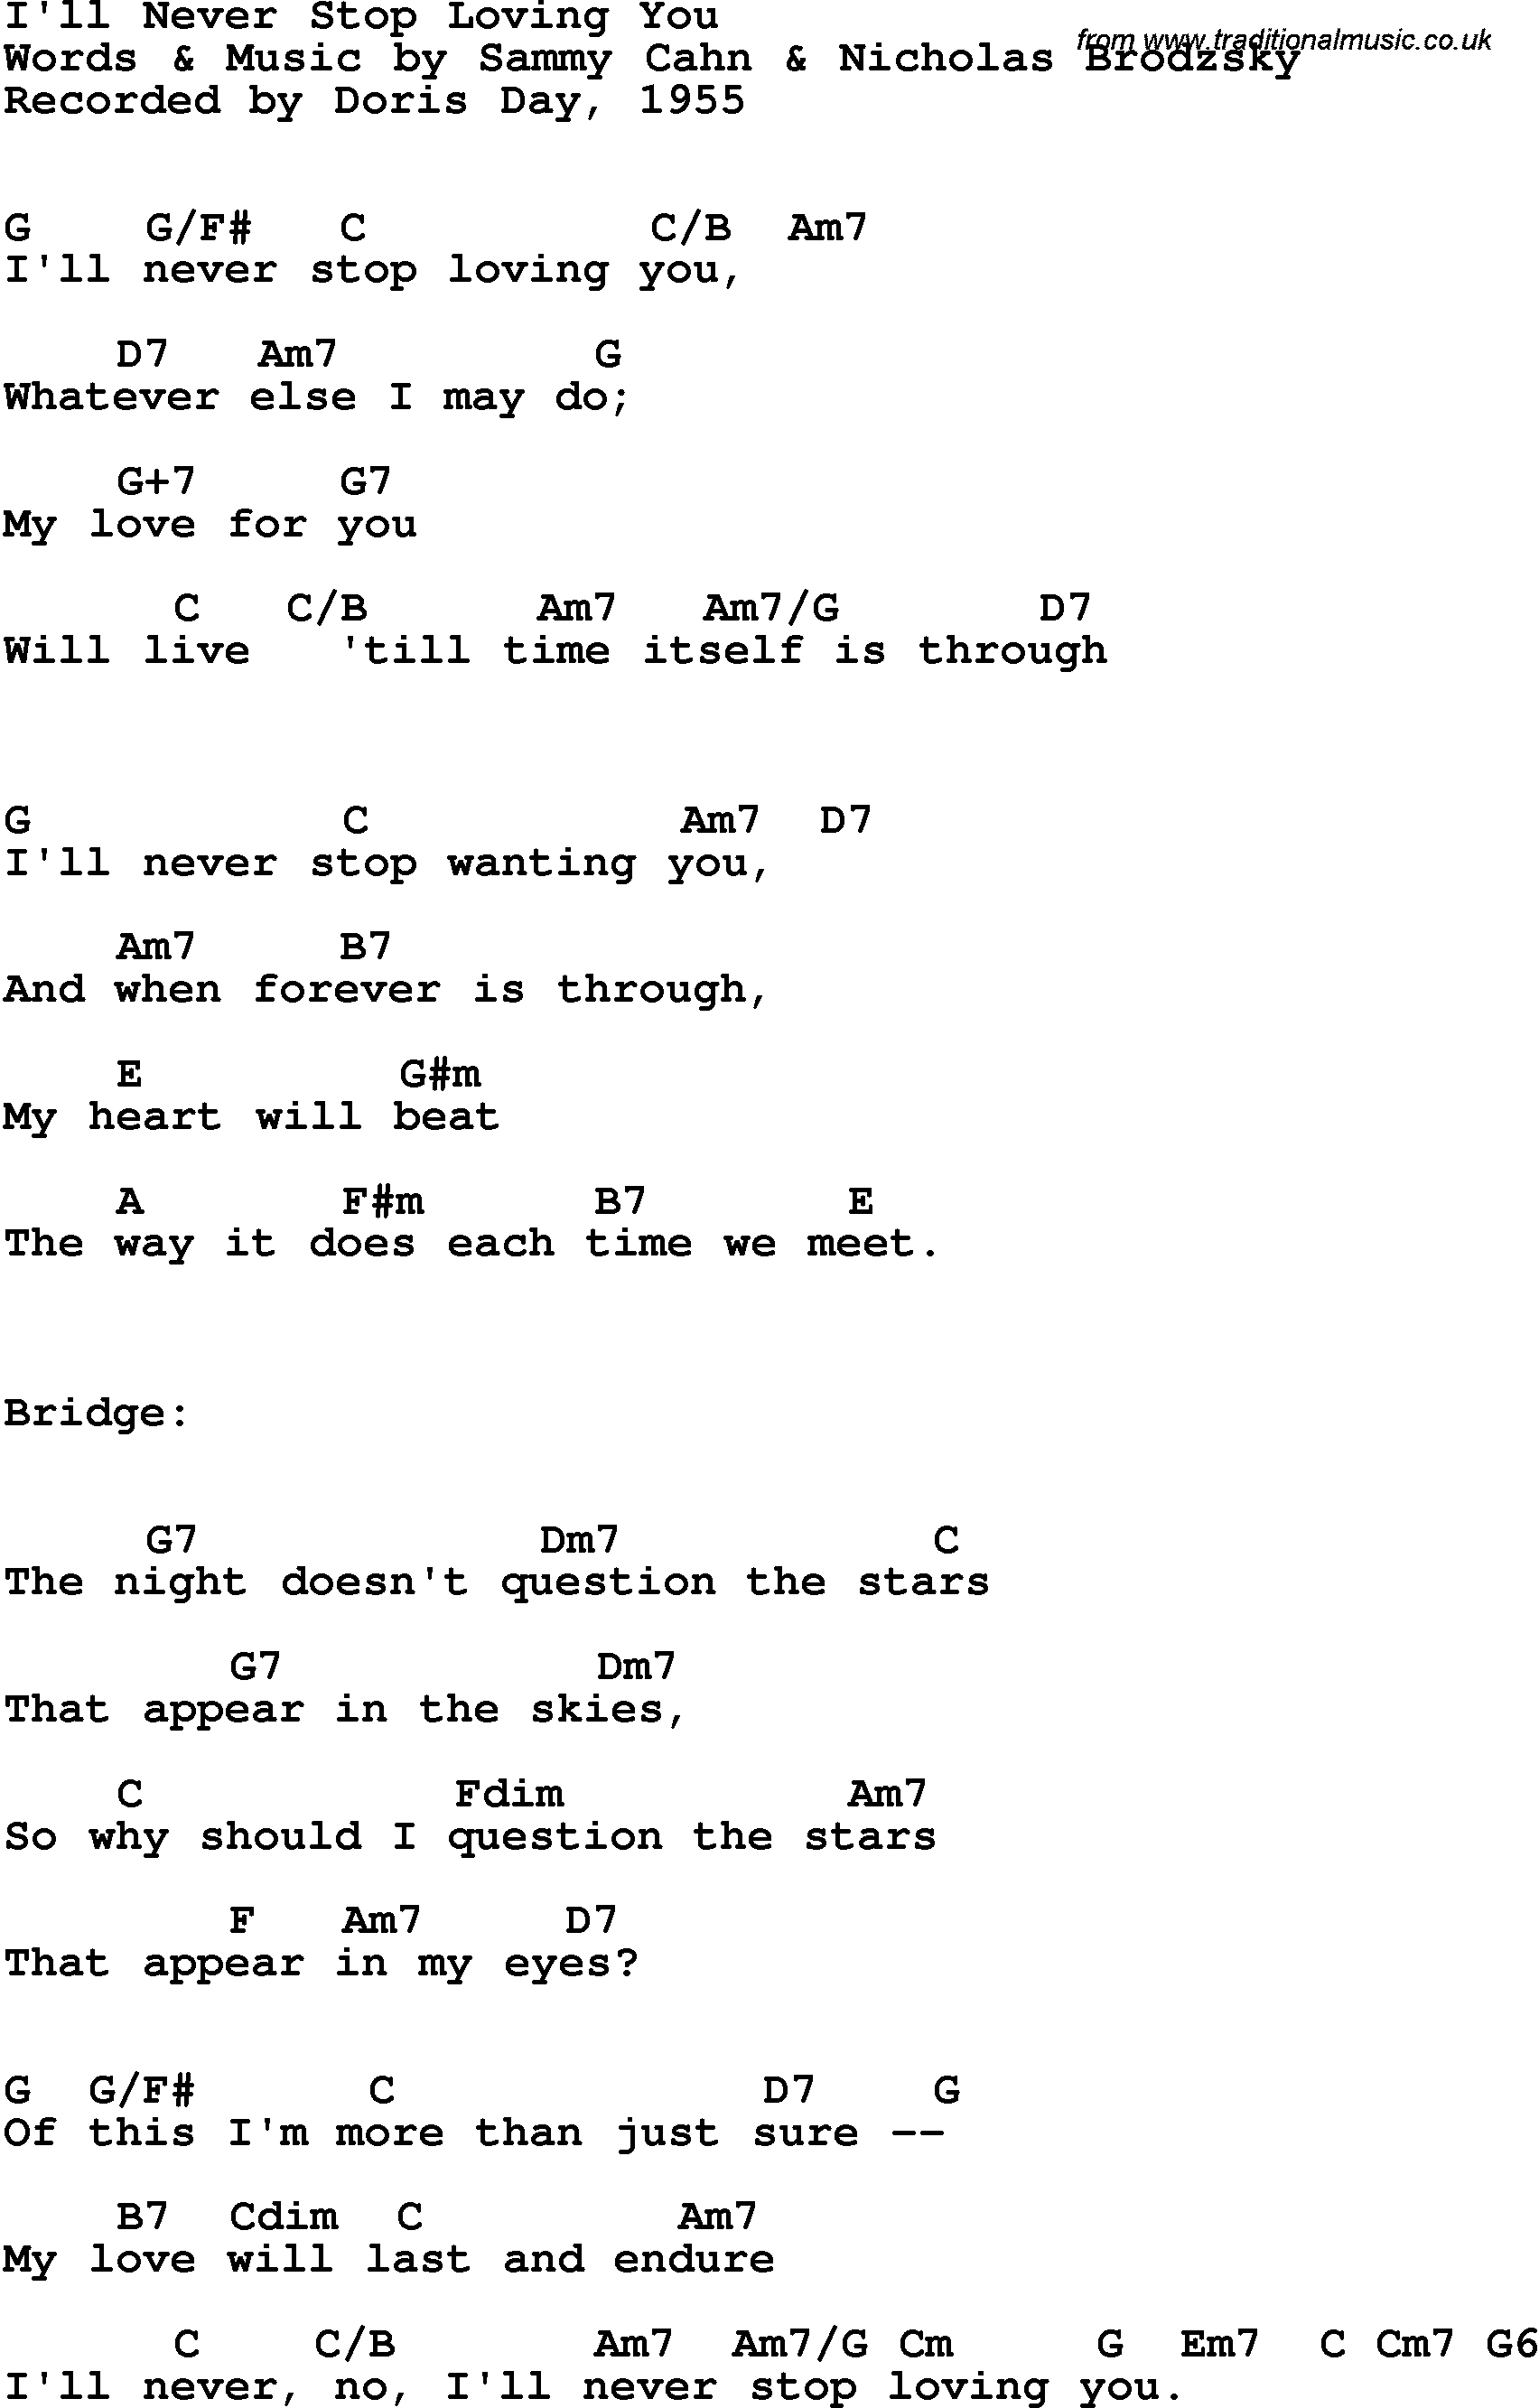 Song Lyrics with guitar chords for I'll Never Stop Loving You - Doris Day, 1955